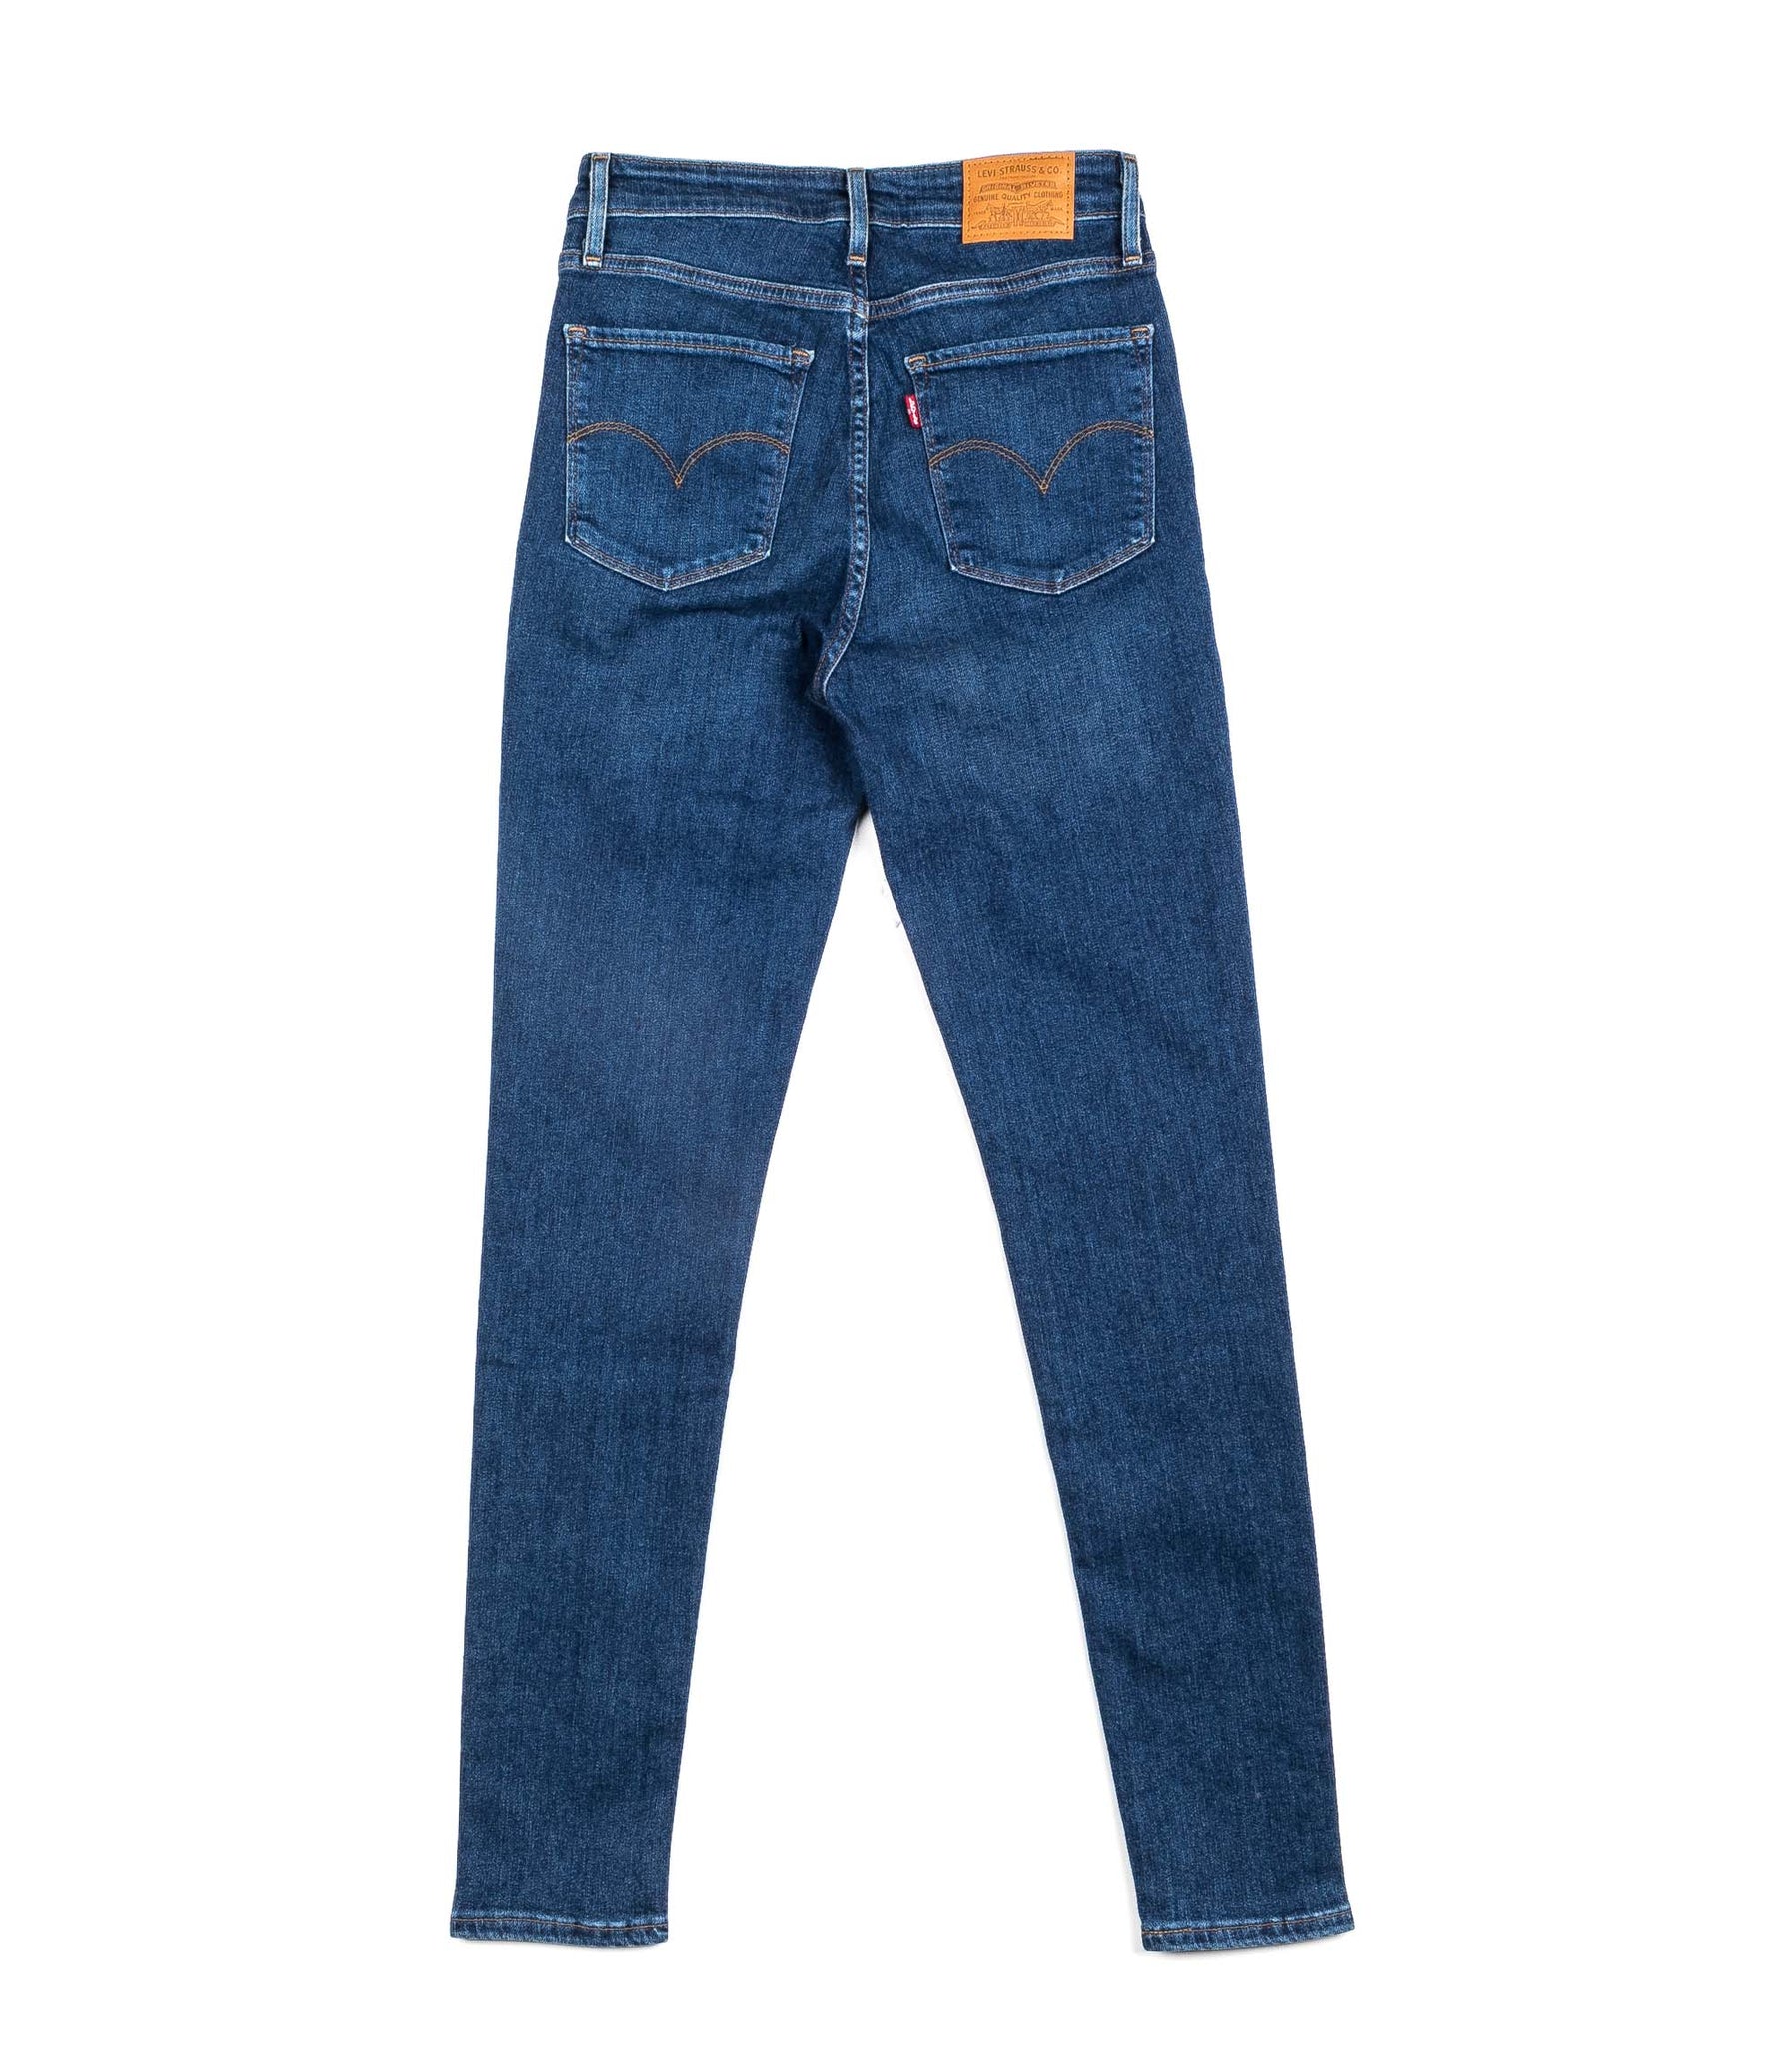 Levi'S 721 Skinny High Rise High Waist Jeans For Women